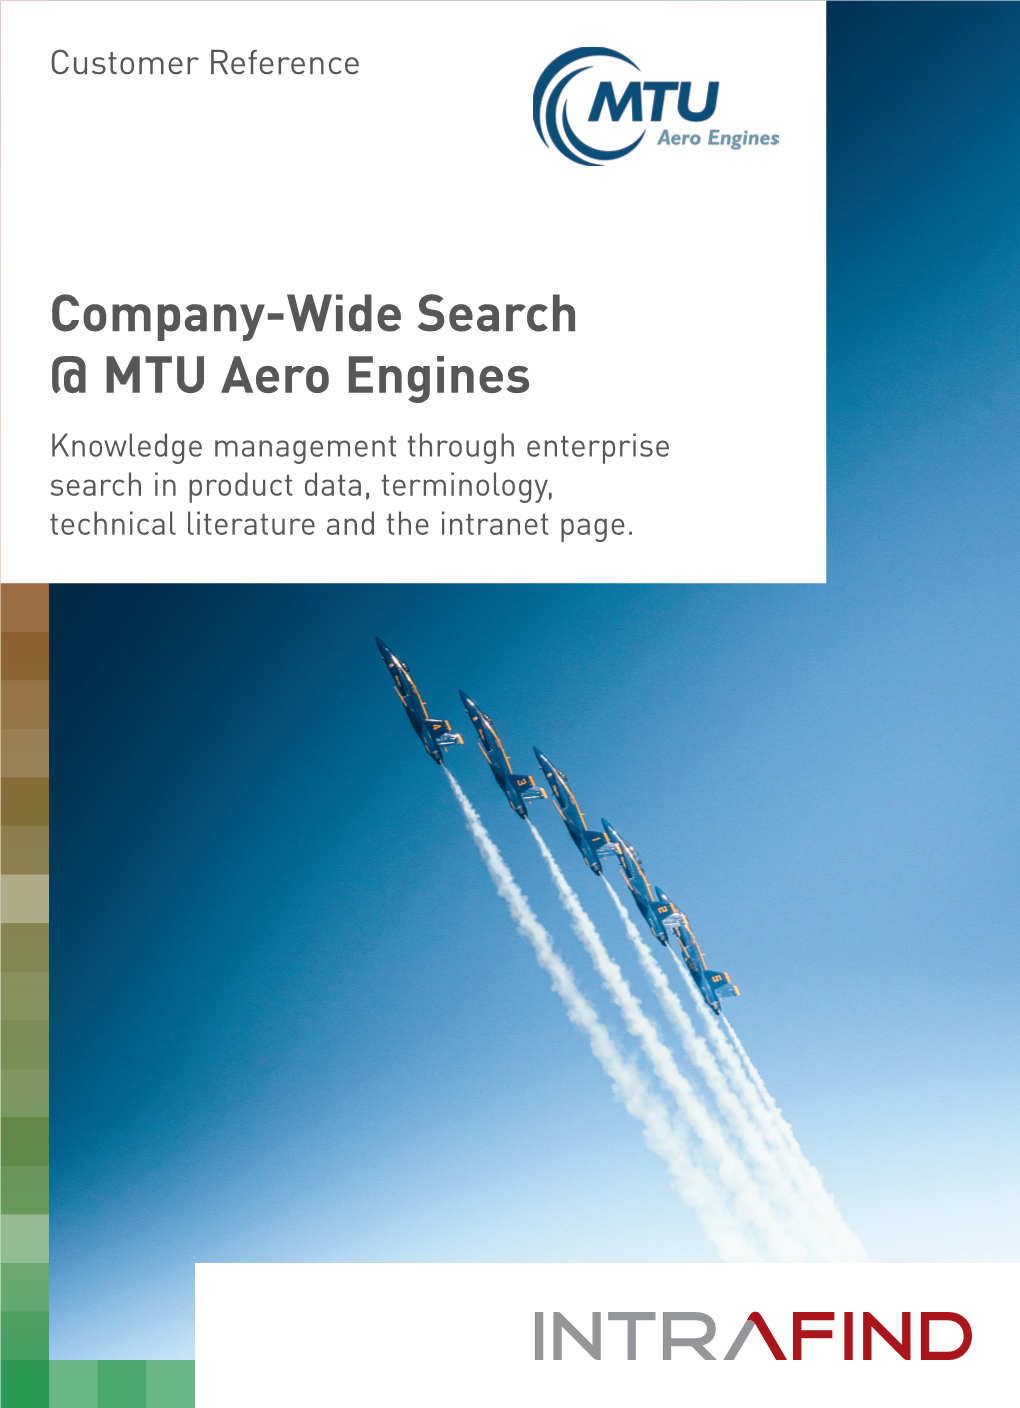 Company-Wide Search @ MTU Aero Engines Knowledge Management Through Enterprise Search in Product Data, Terminology, Technical Literature and the Intranet Page